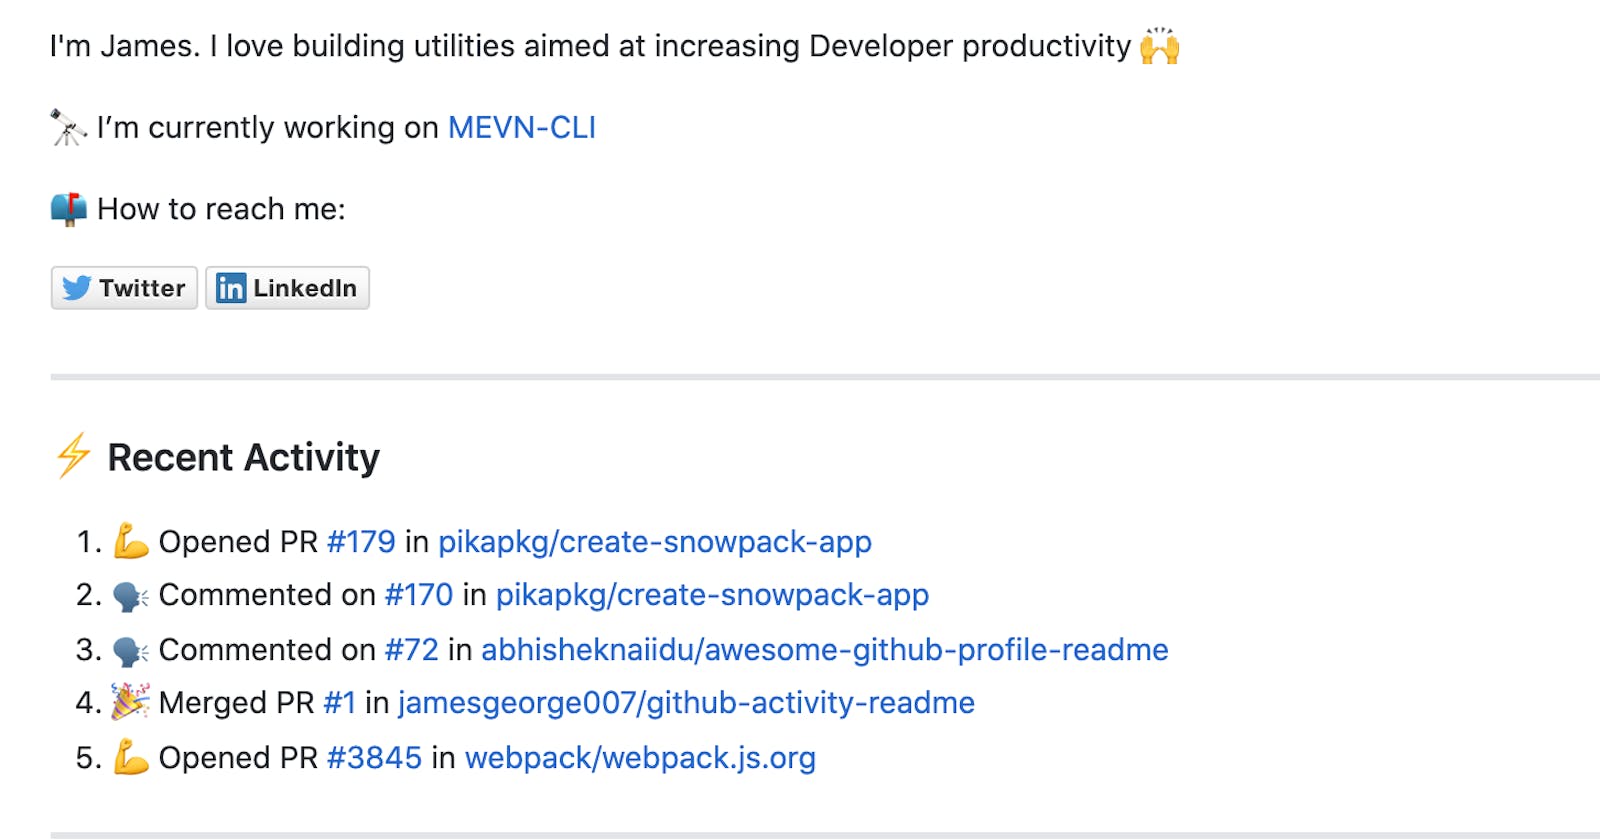 Here's a GitHub Action that would update README with the recent activity of a user